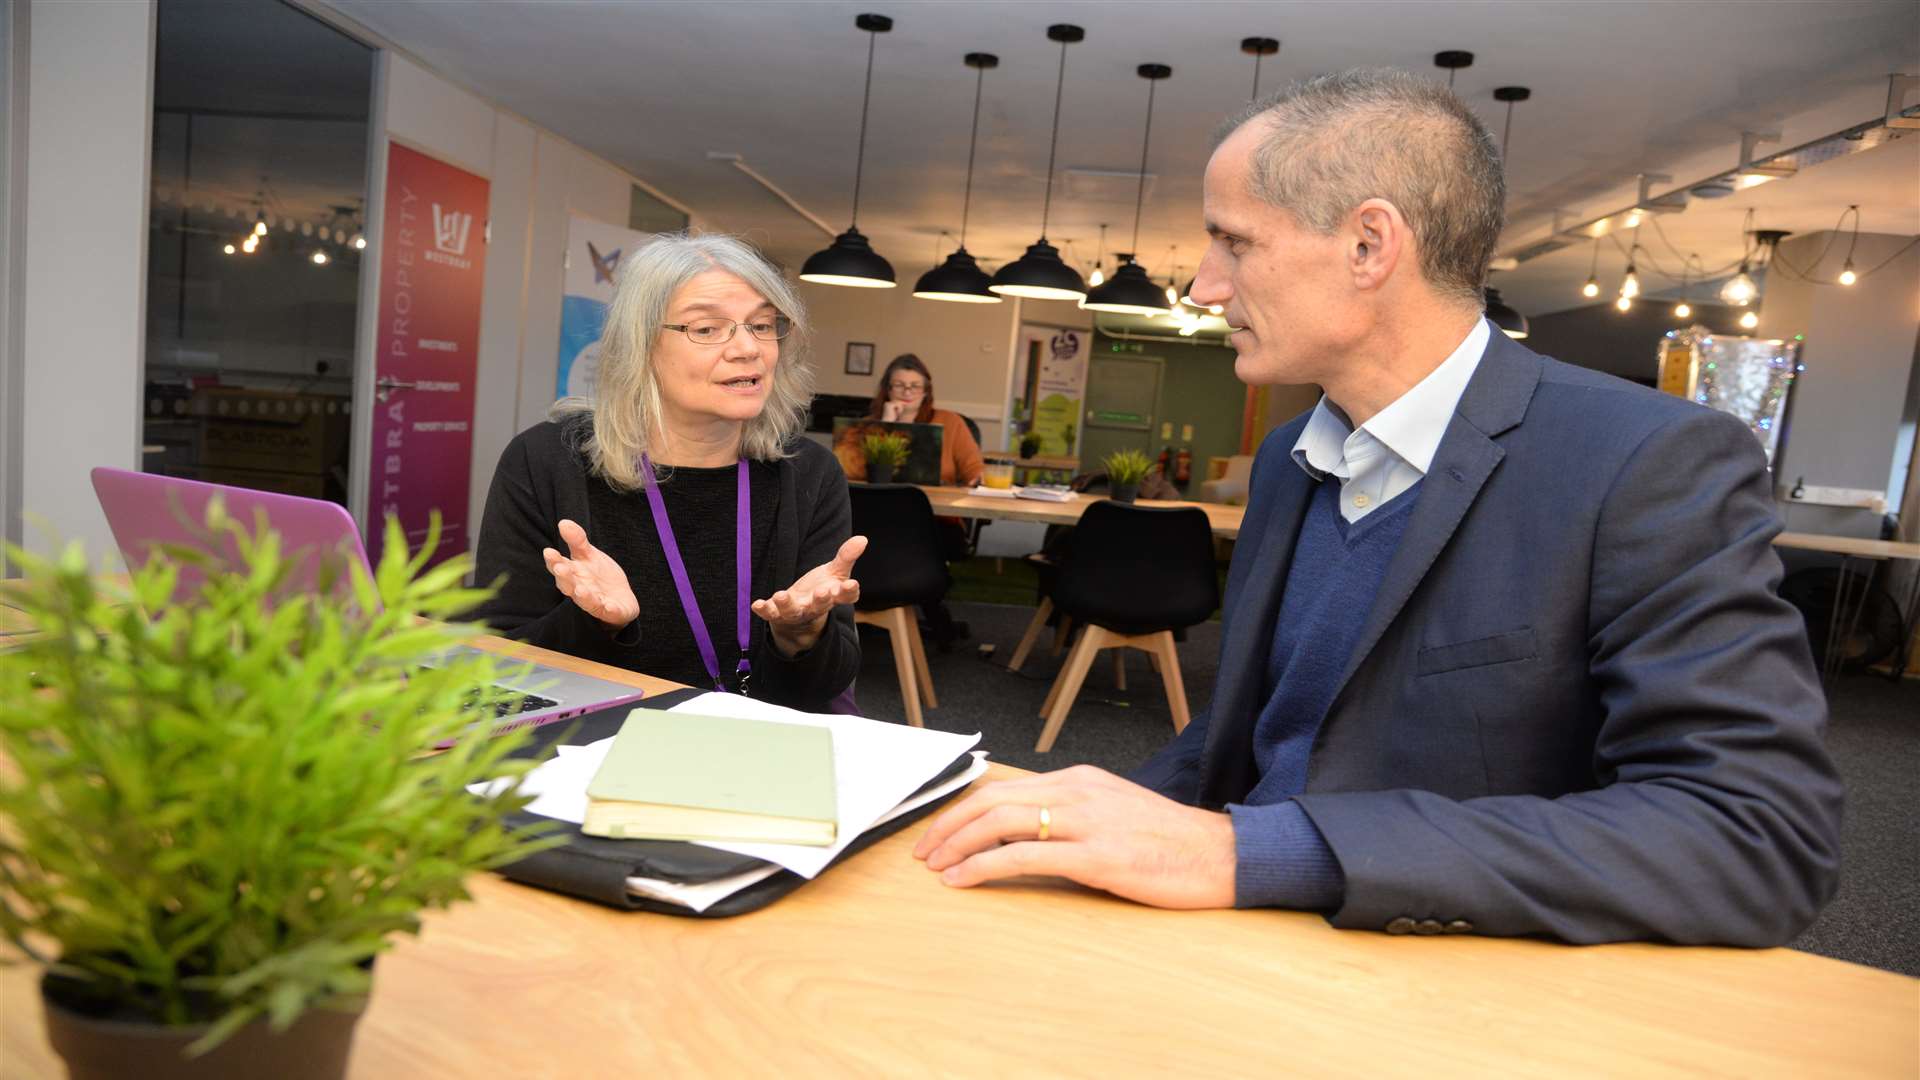 Karen Scott of futureCoders met Bill Esterson, shadow minister for business and international trade, at the Dragon Co-working space